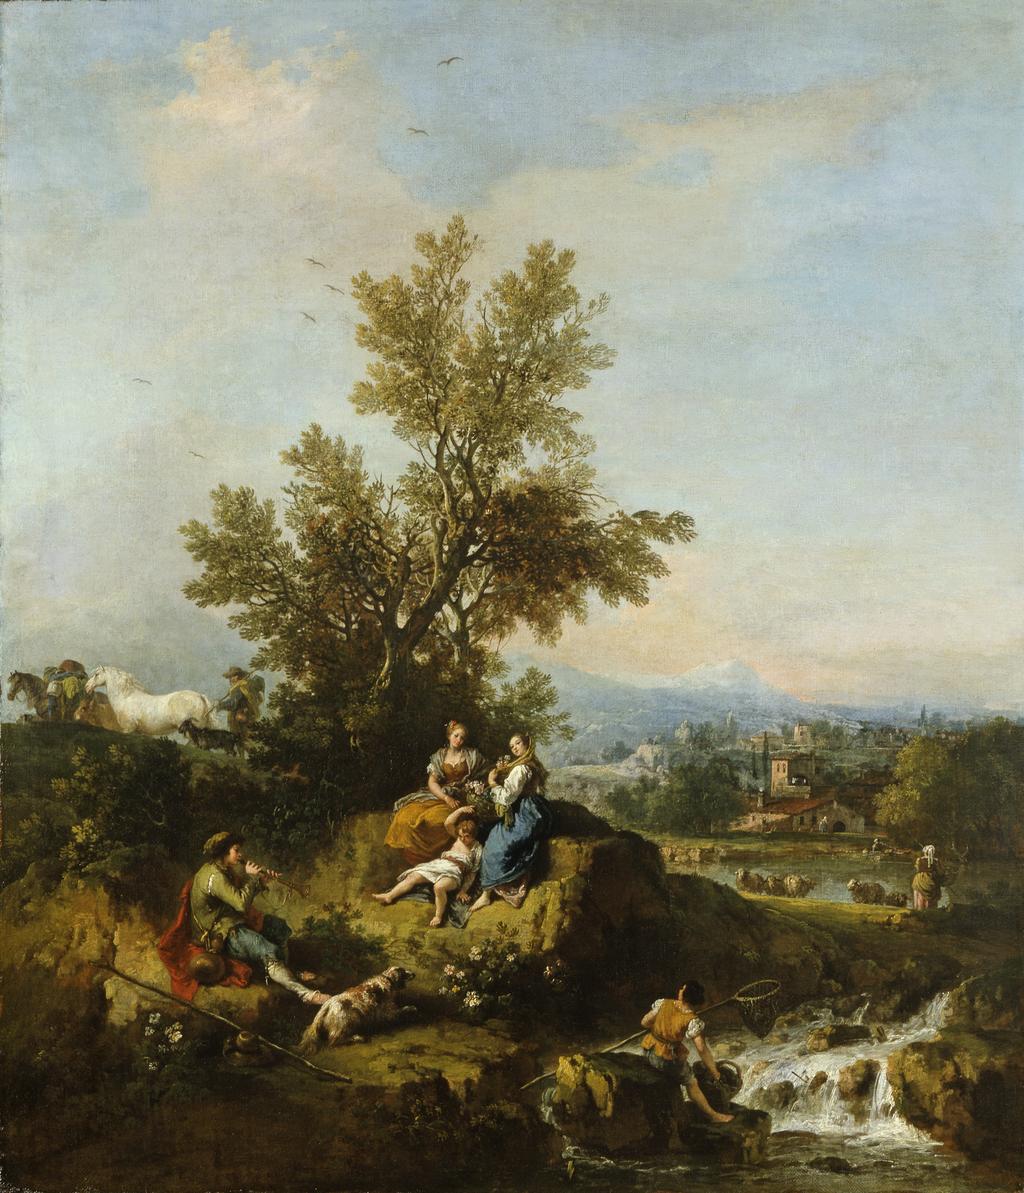 An image of Italianate wooded river landscape with a piping shepherd, two women and a child. Zuccarelli, Francesco (Italian, 1702-1788). Oil on canvas, height 105.5 cm, width 89.5 cm.